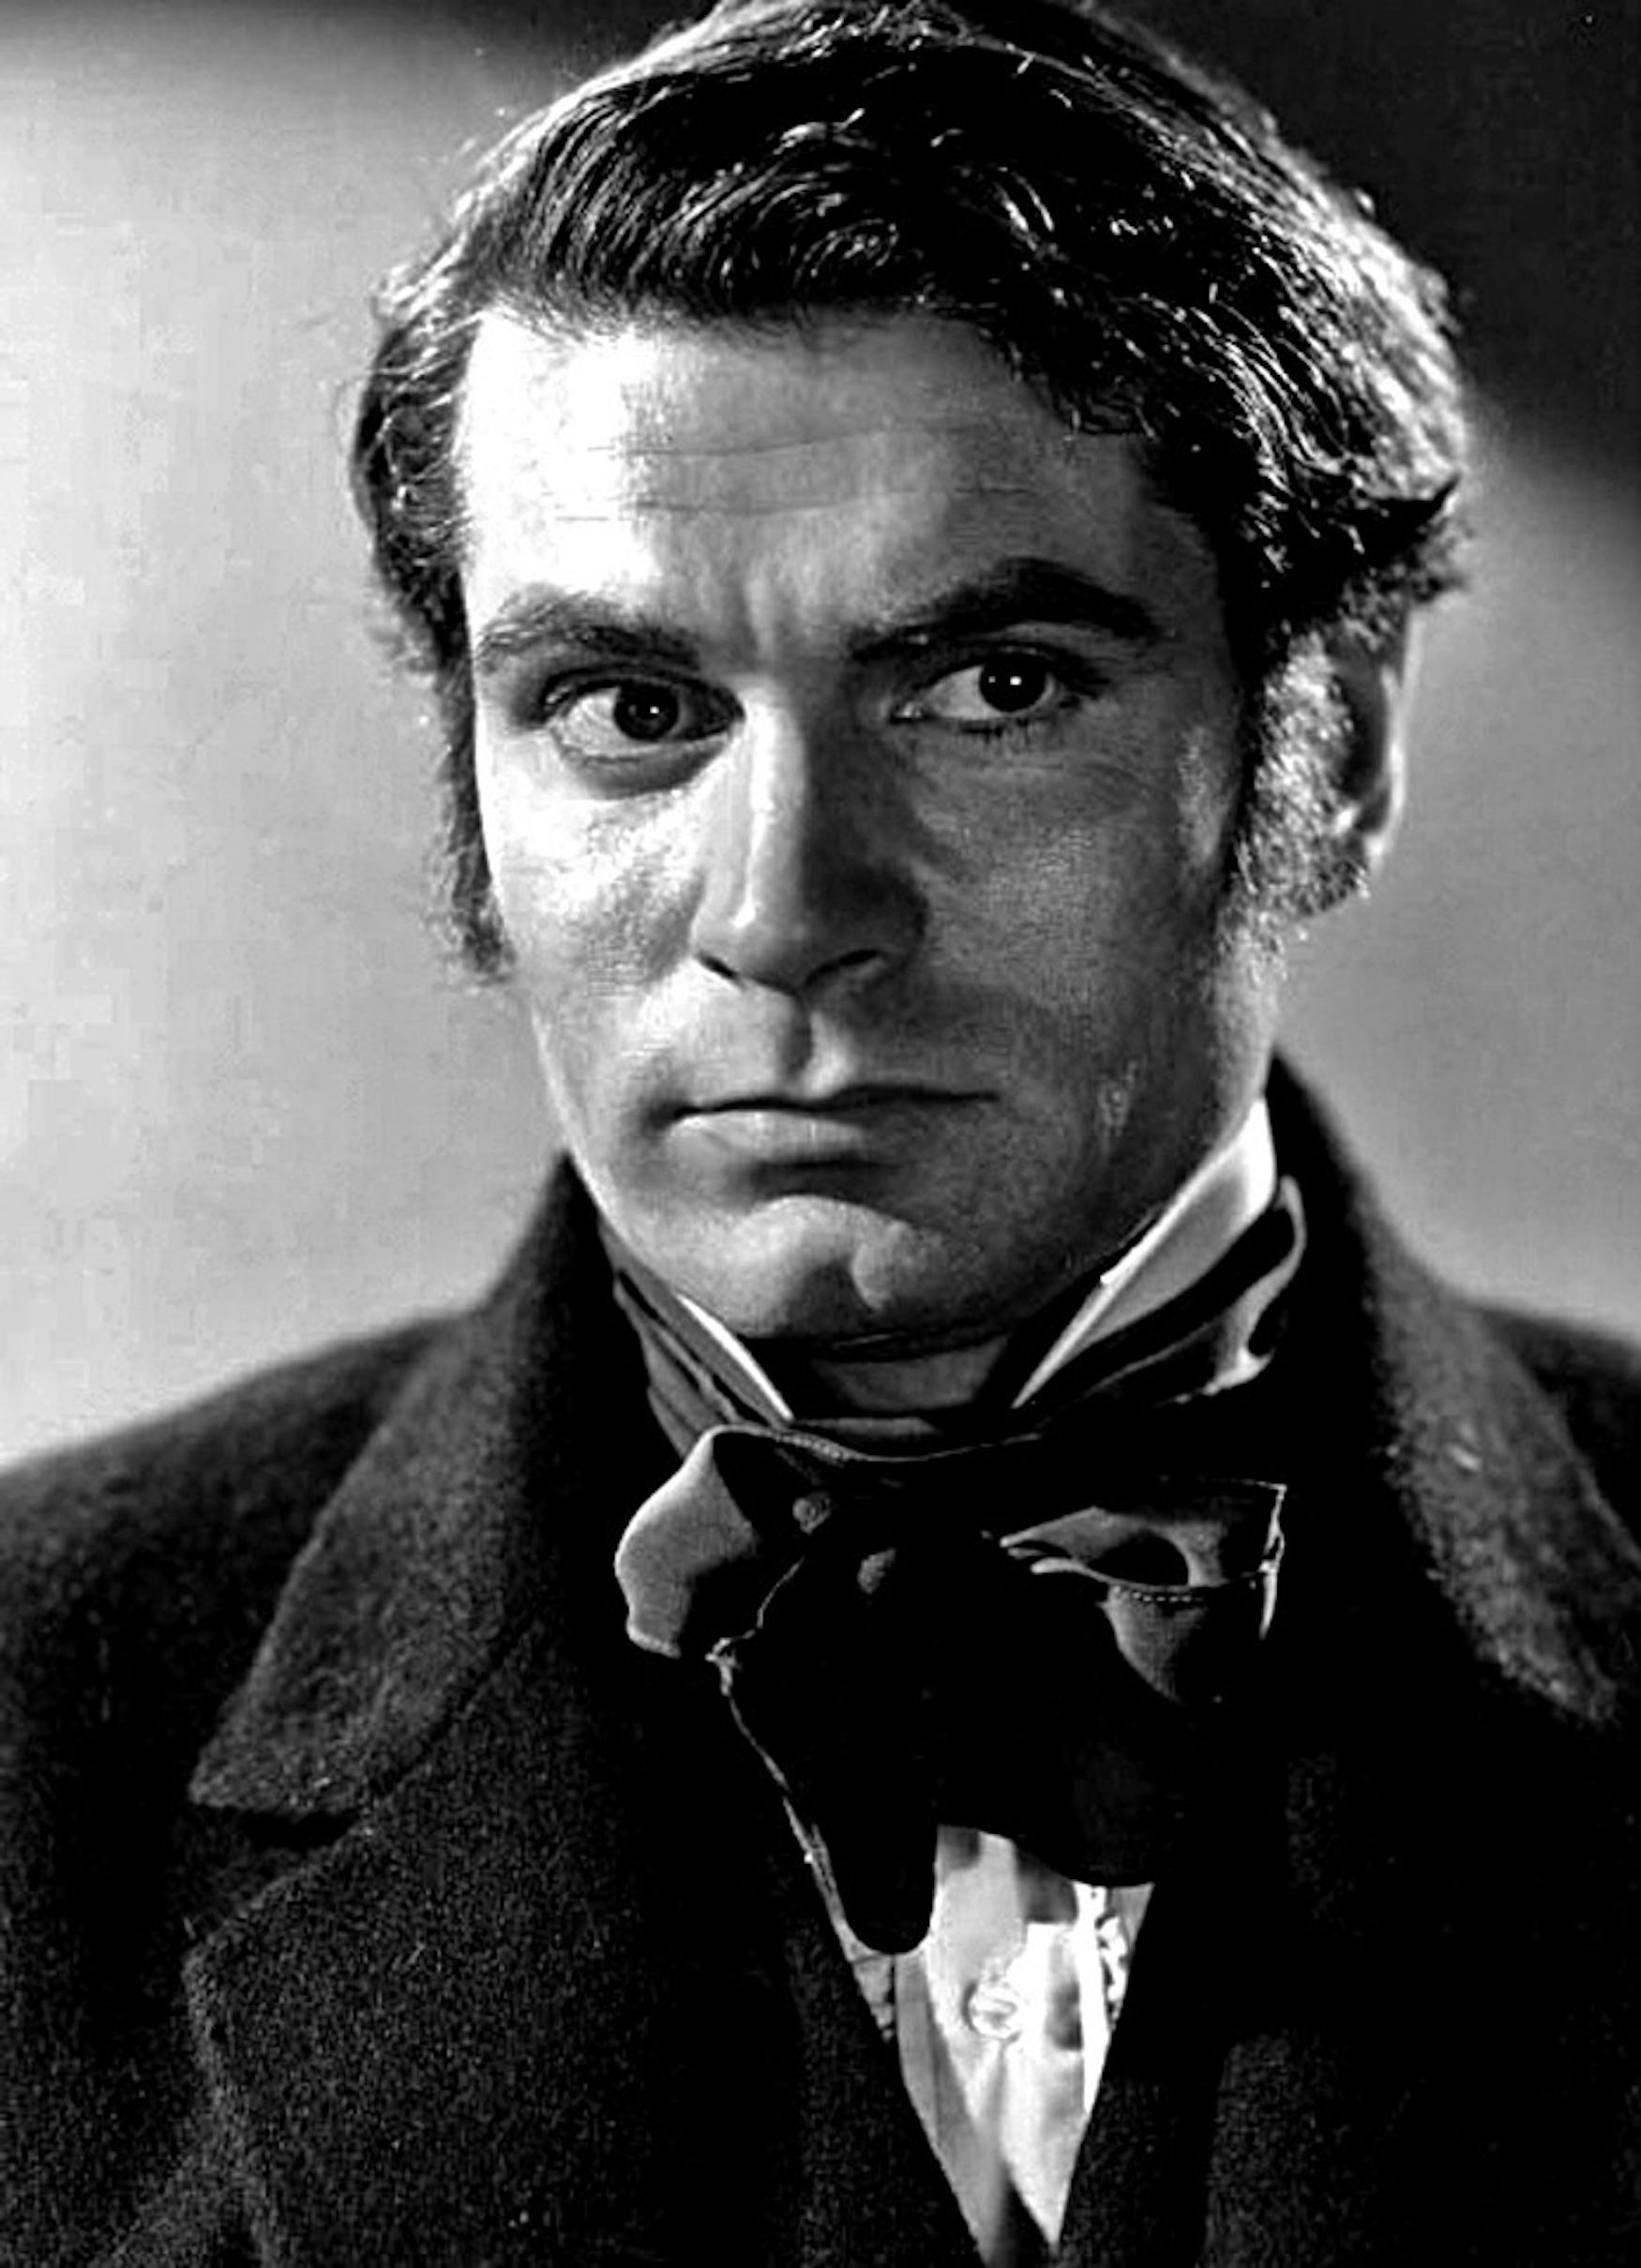 DEEP VENGEANCE: Heathcliff, pictured above as played by Lawrence Olivier in the 1939 film adaption of Wuthering Heights, patiently seeks revenge in Brontë’s novel.